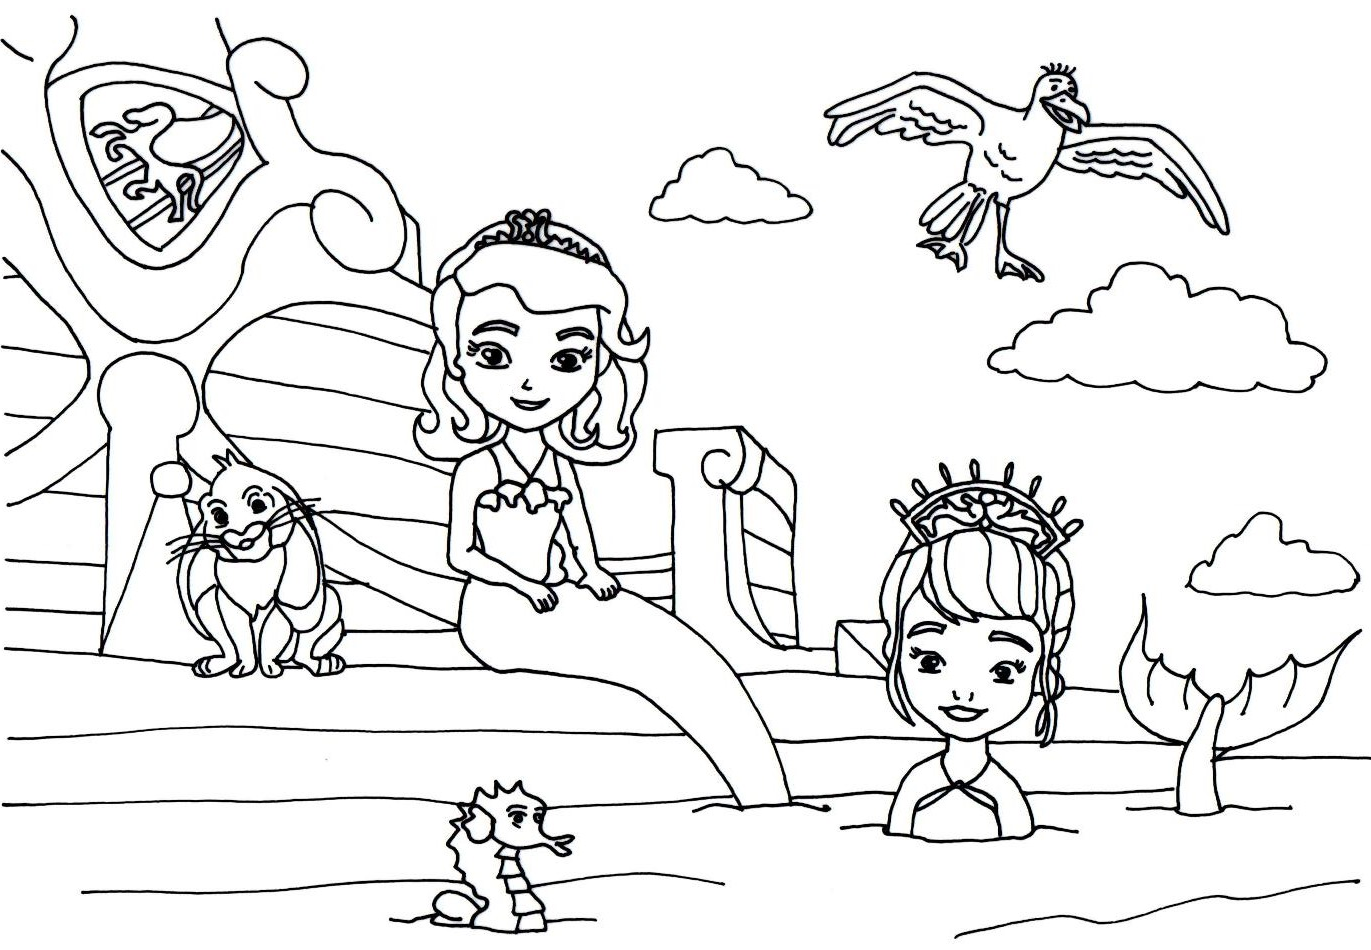 Sofia The First Coloring Pages: Floating Palace Sofia the First ...